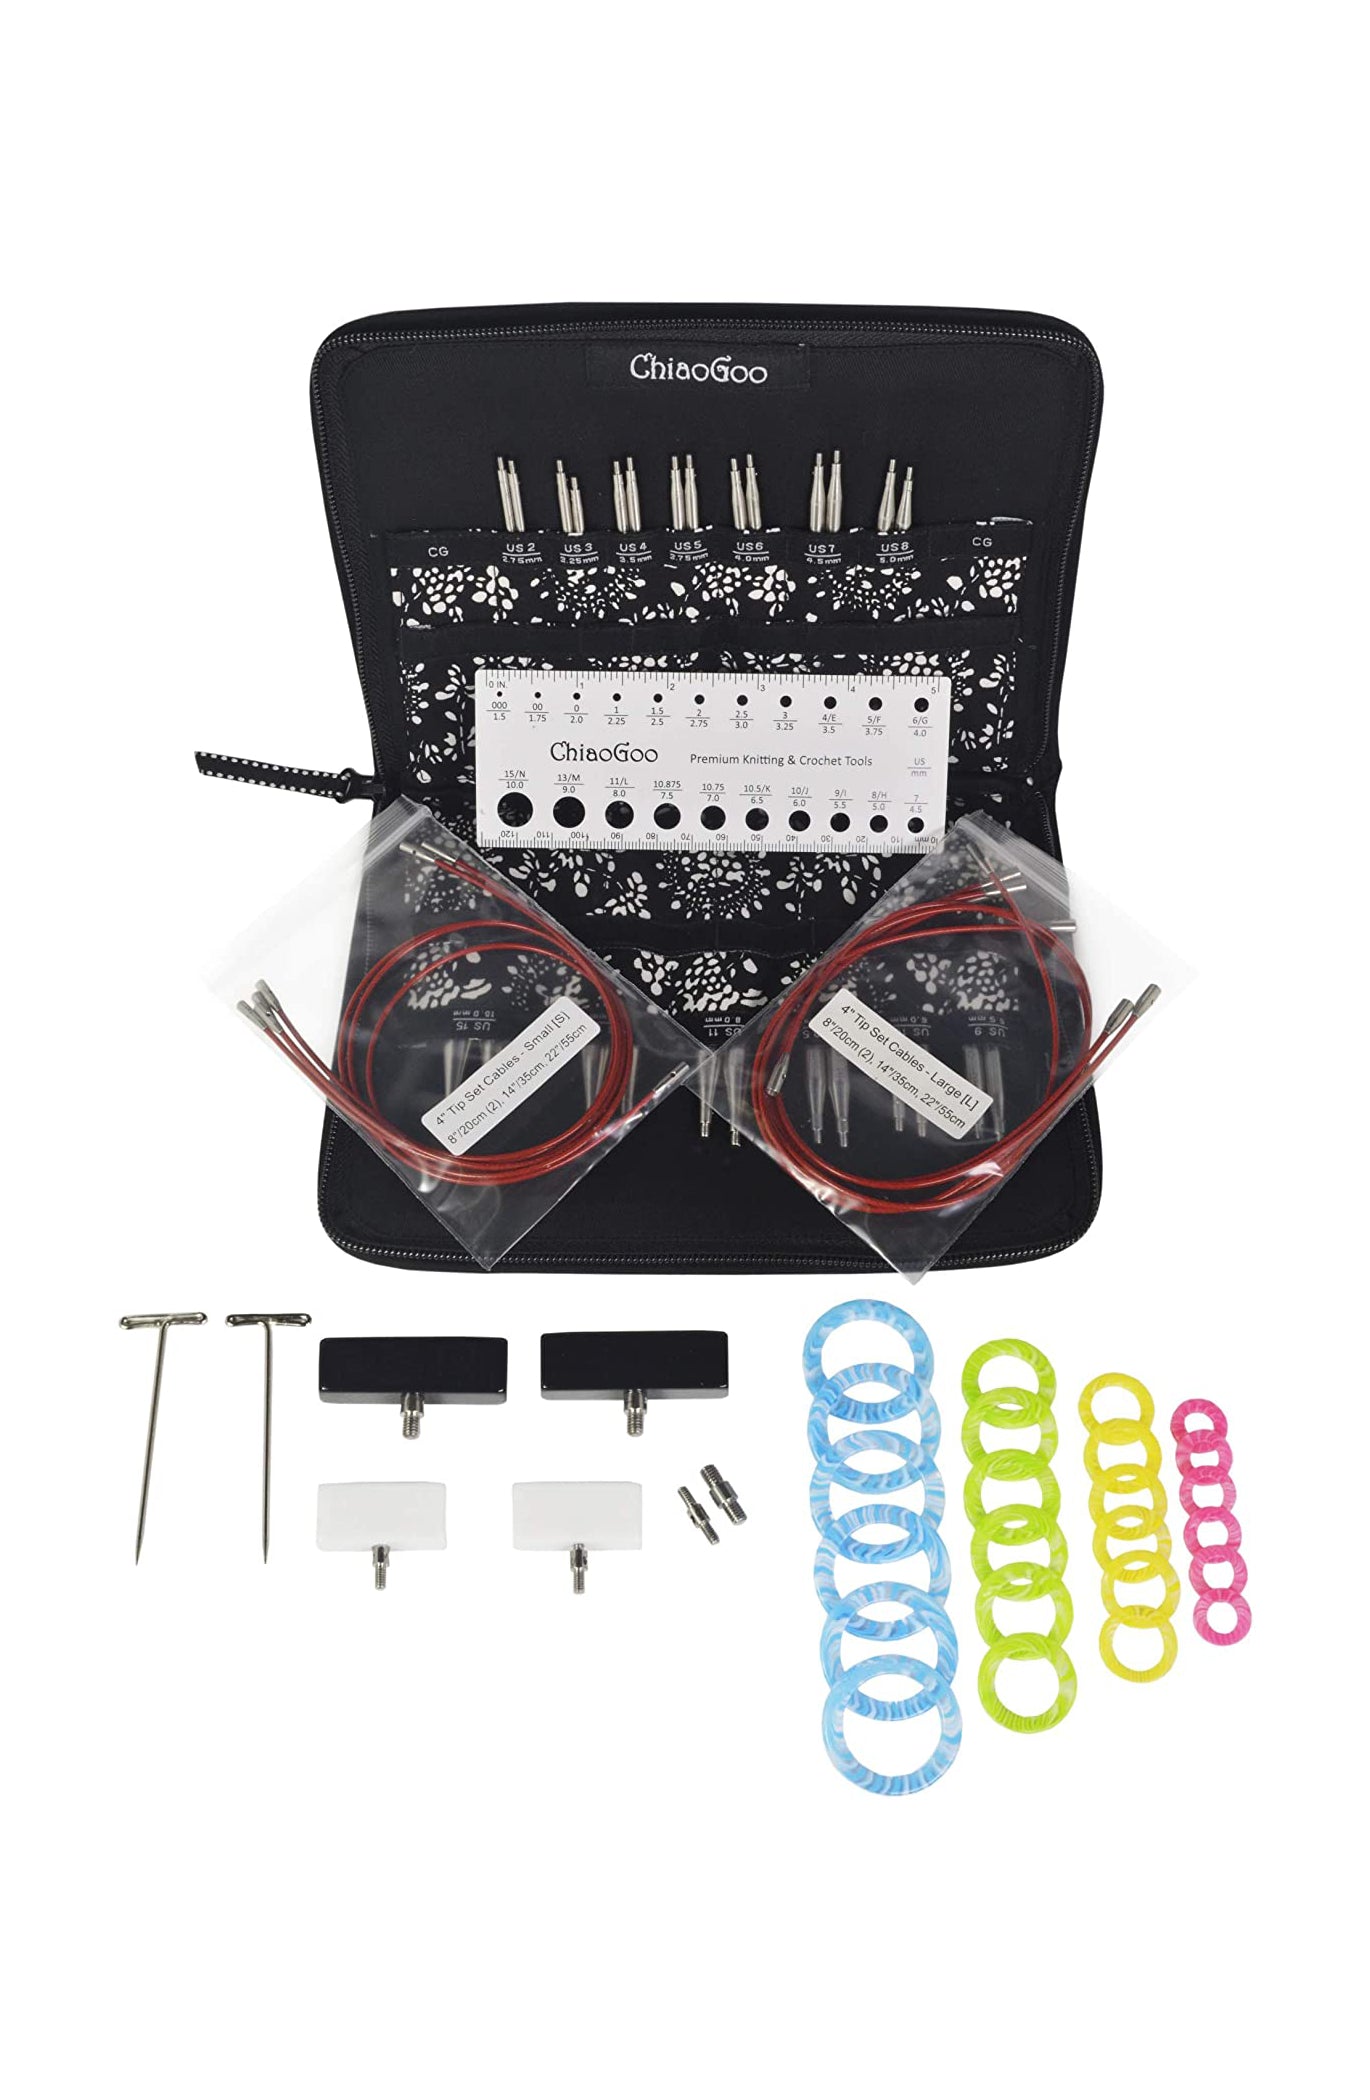 ChiaoGoo Twist Red Lace 4-Inch Mini 7400-M Interchangeable Circular Needle  Set, Sizes US 000, 00, 0, 1, 1.5 with 3 Cords, Connectors, Stitch Markers